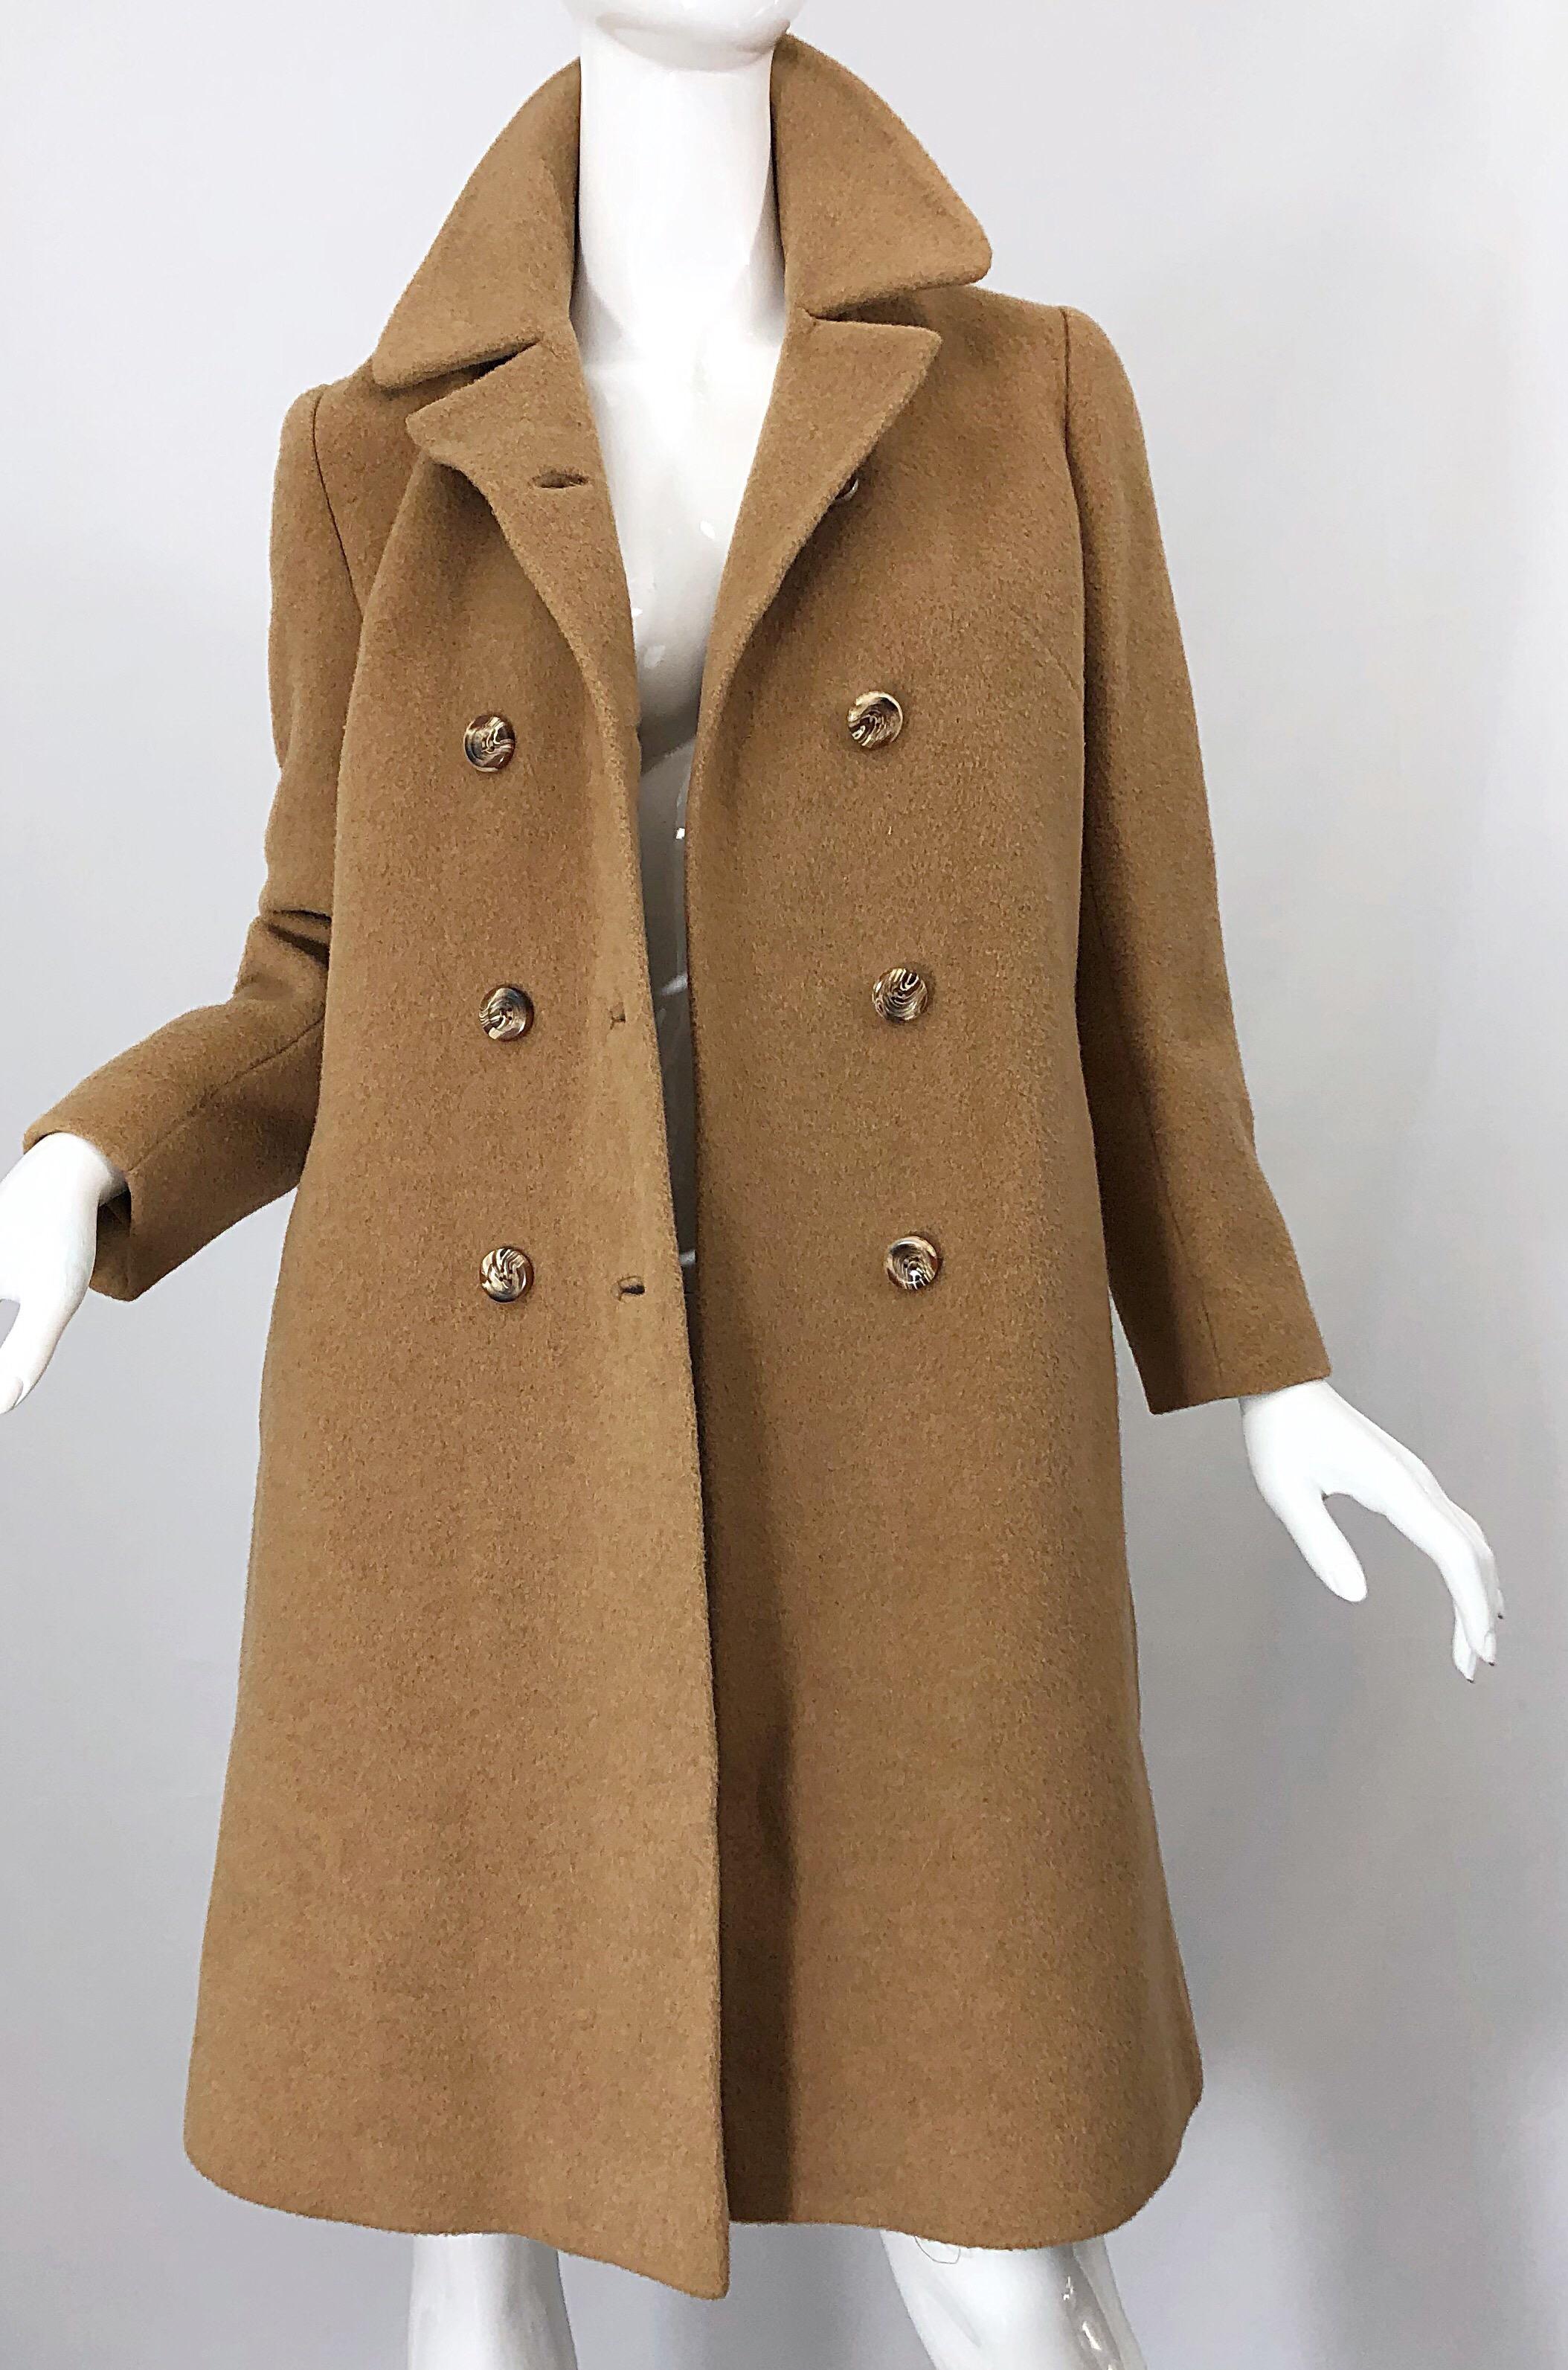 Chic 1960s Camel Tan Camels Hair Wool Double Breasted Vintage Swing Jacket Coat 4